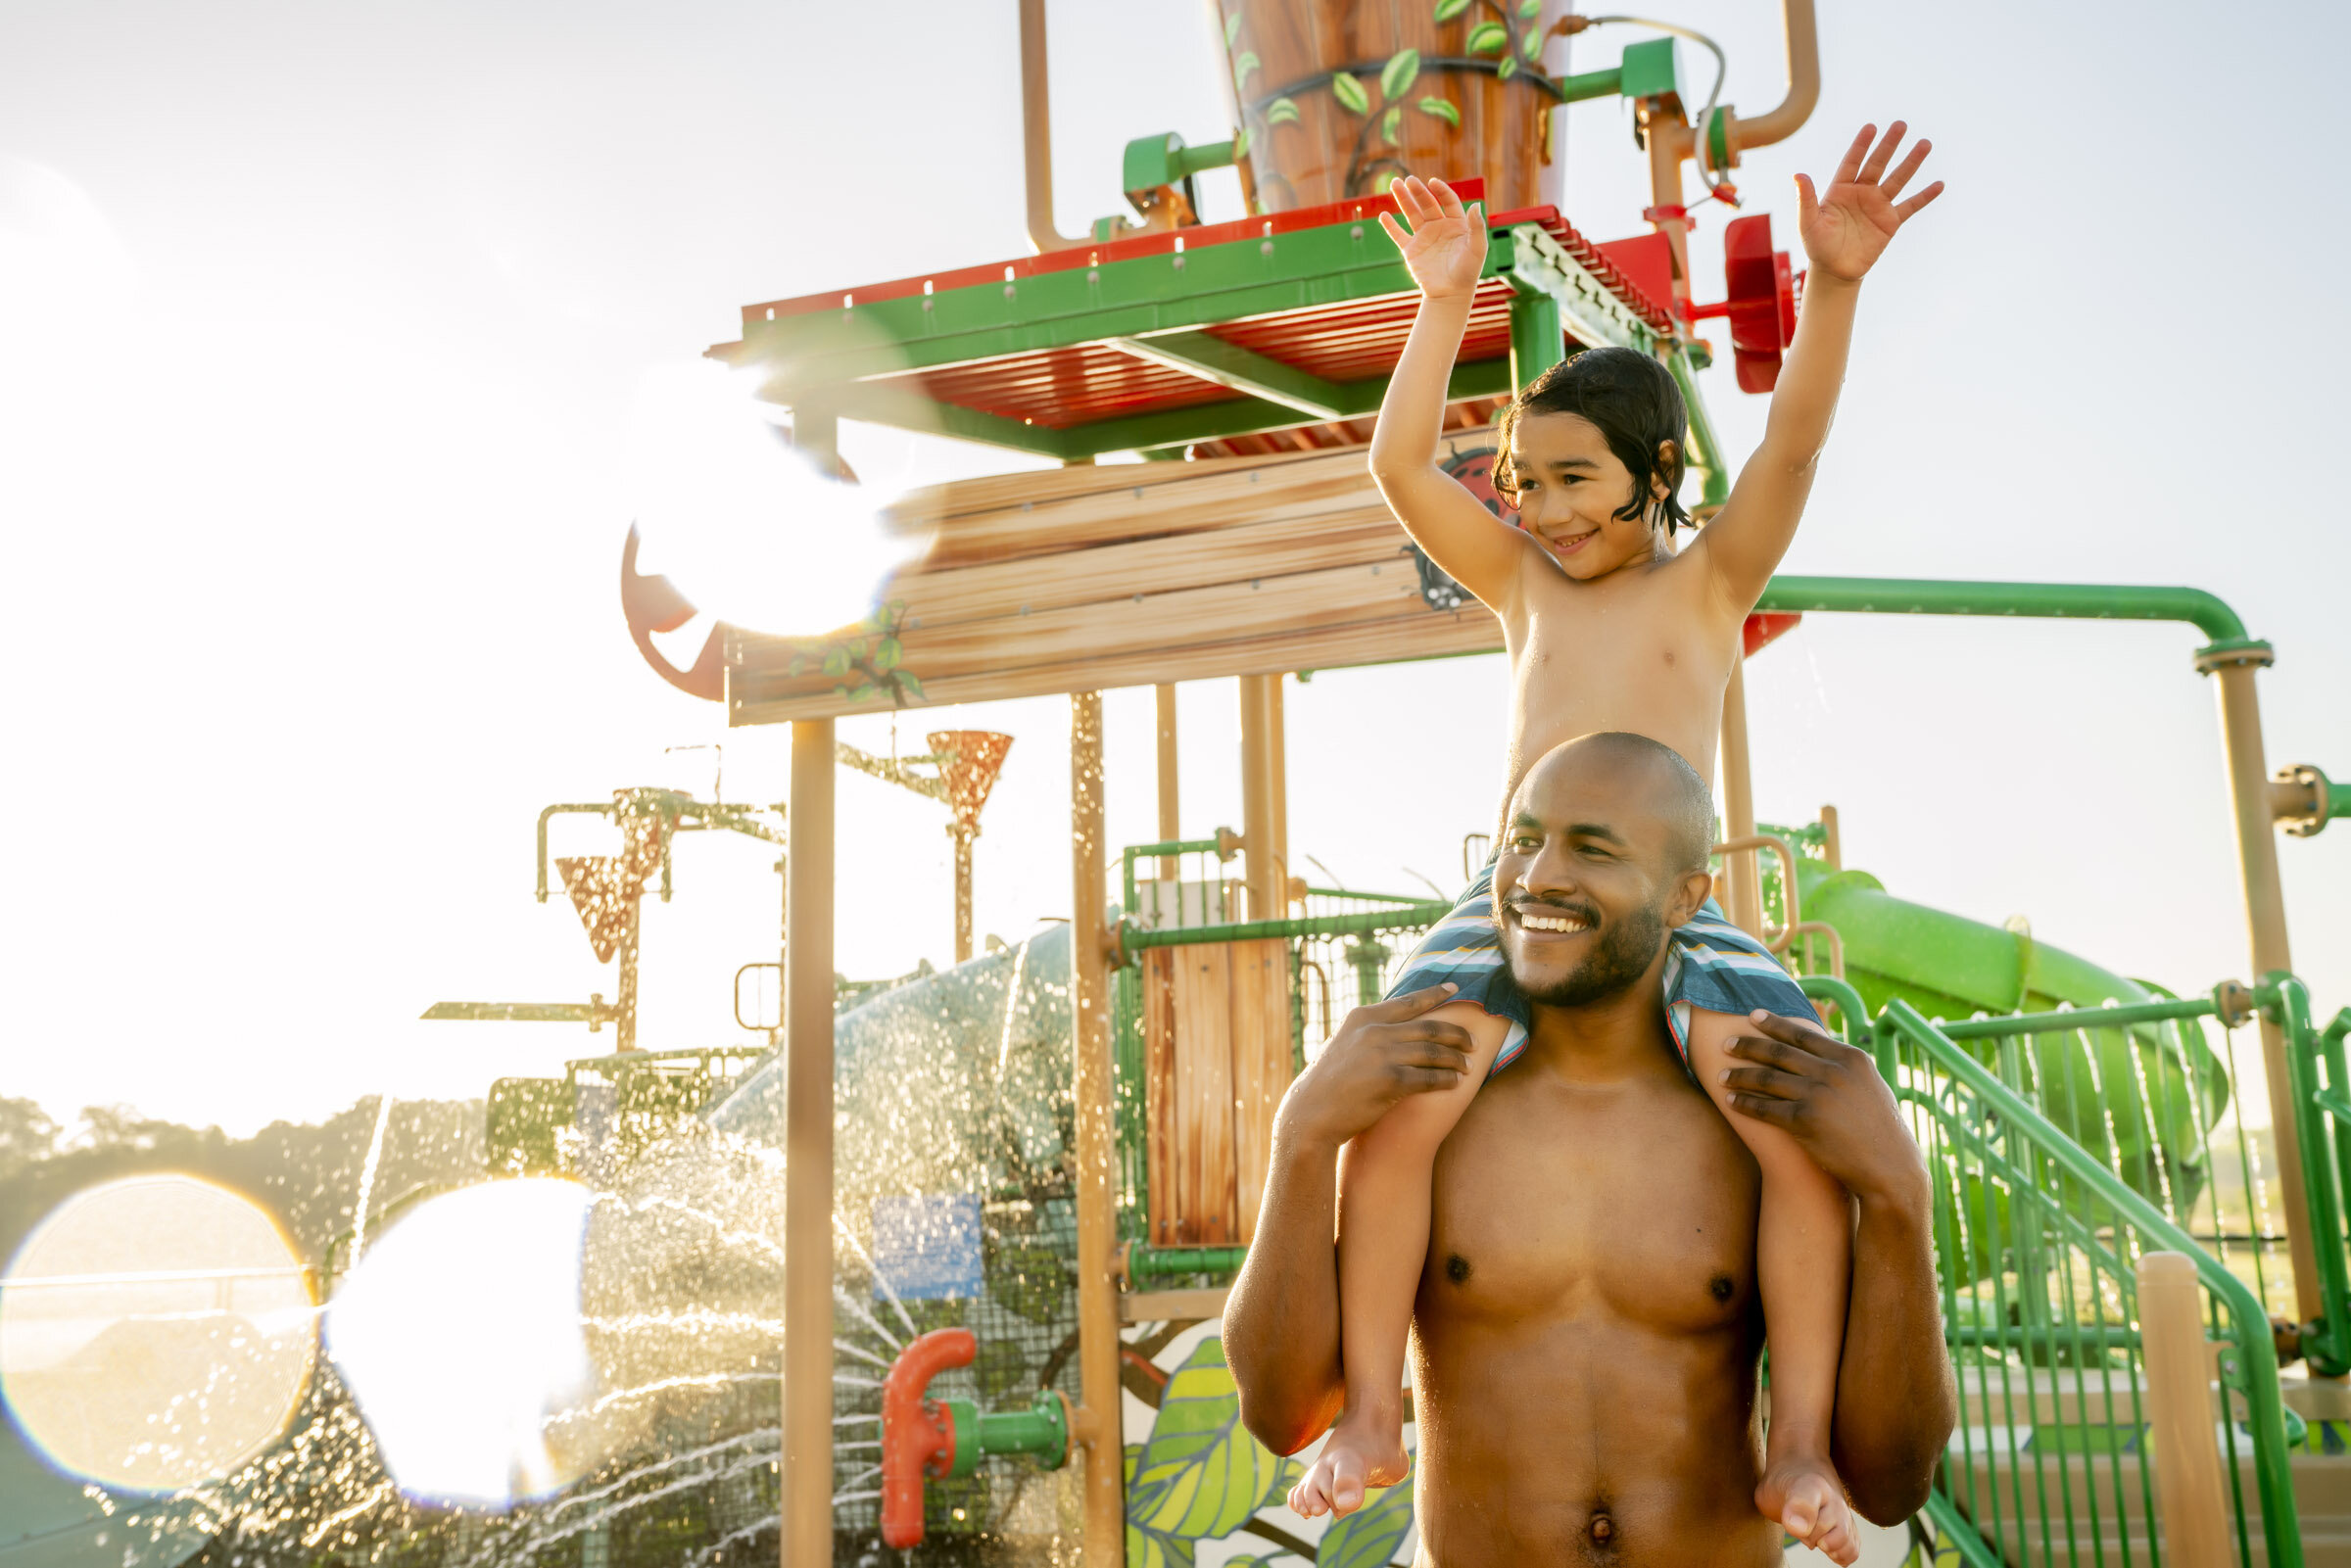 Dad-carying-son-on-shoulders-at-resort-water-park-Inti-St-Clair-is20180508_Meridina_10155.jpg